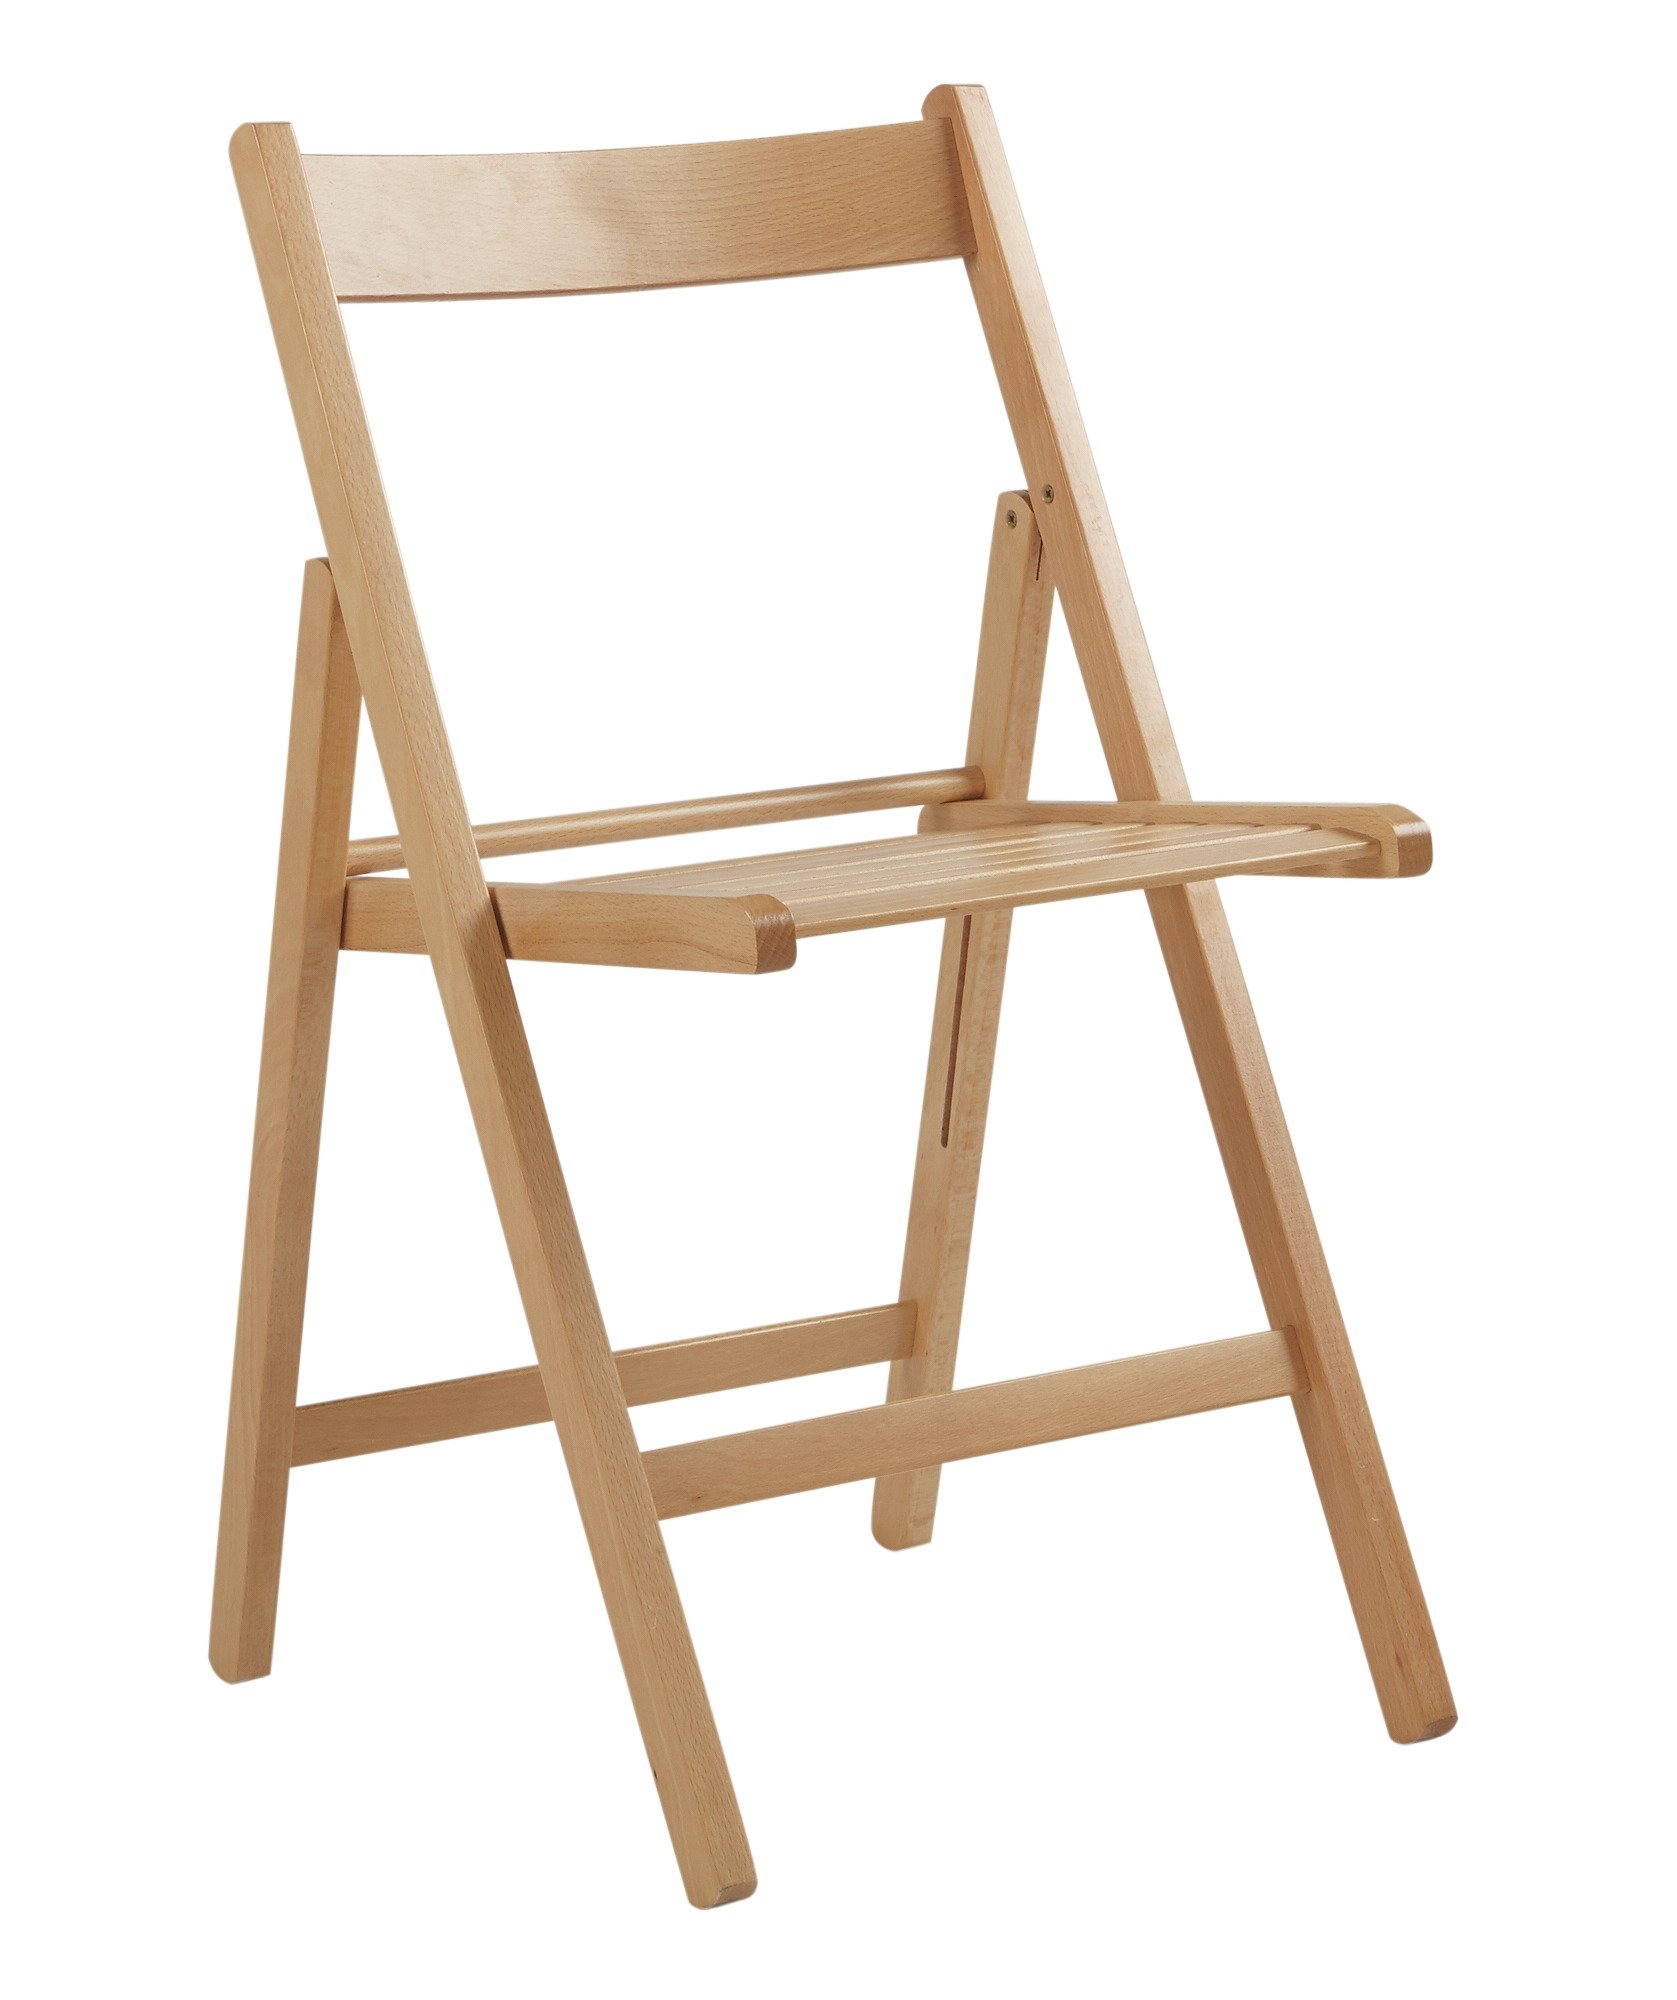 where can i buy folding chairs